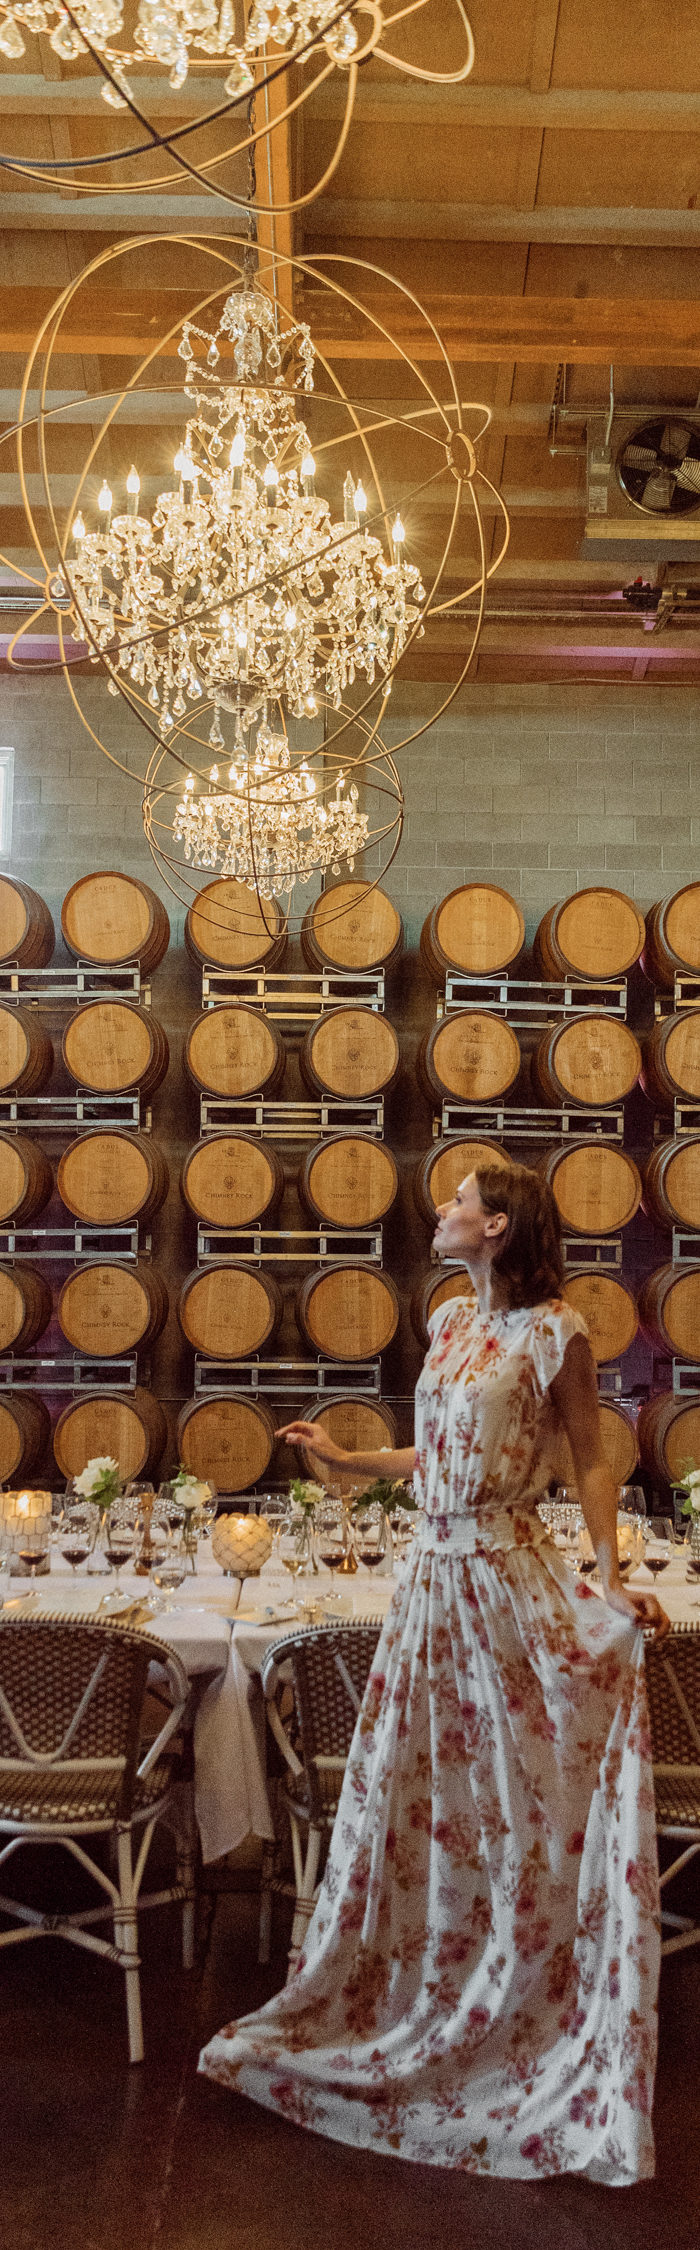 Alyssa Campanella of The A List blog enjoys a wine and design visit with Serena & Lily and Visit Napa Valley